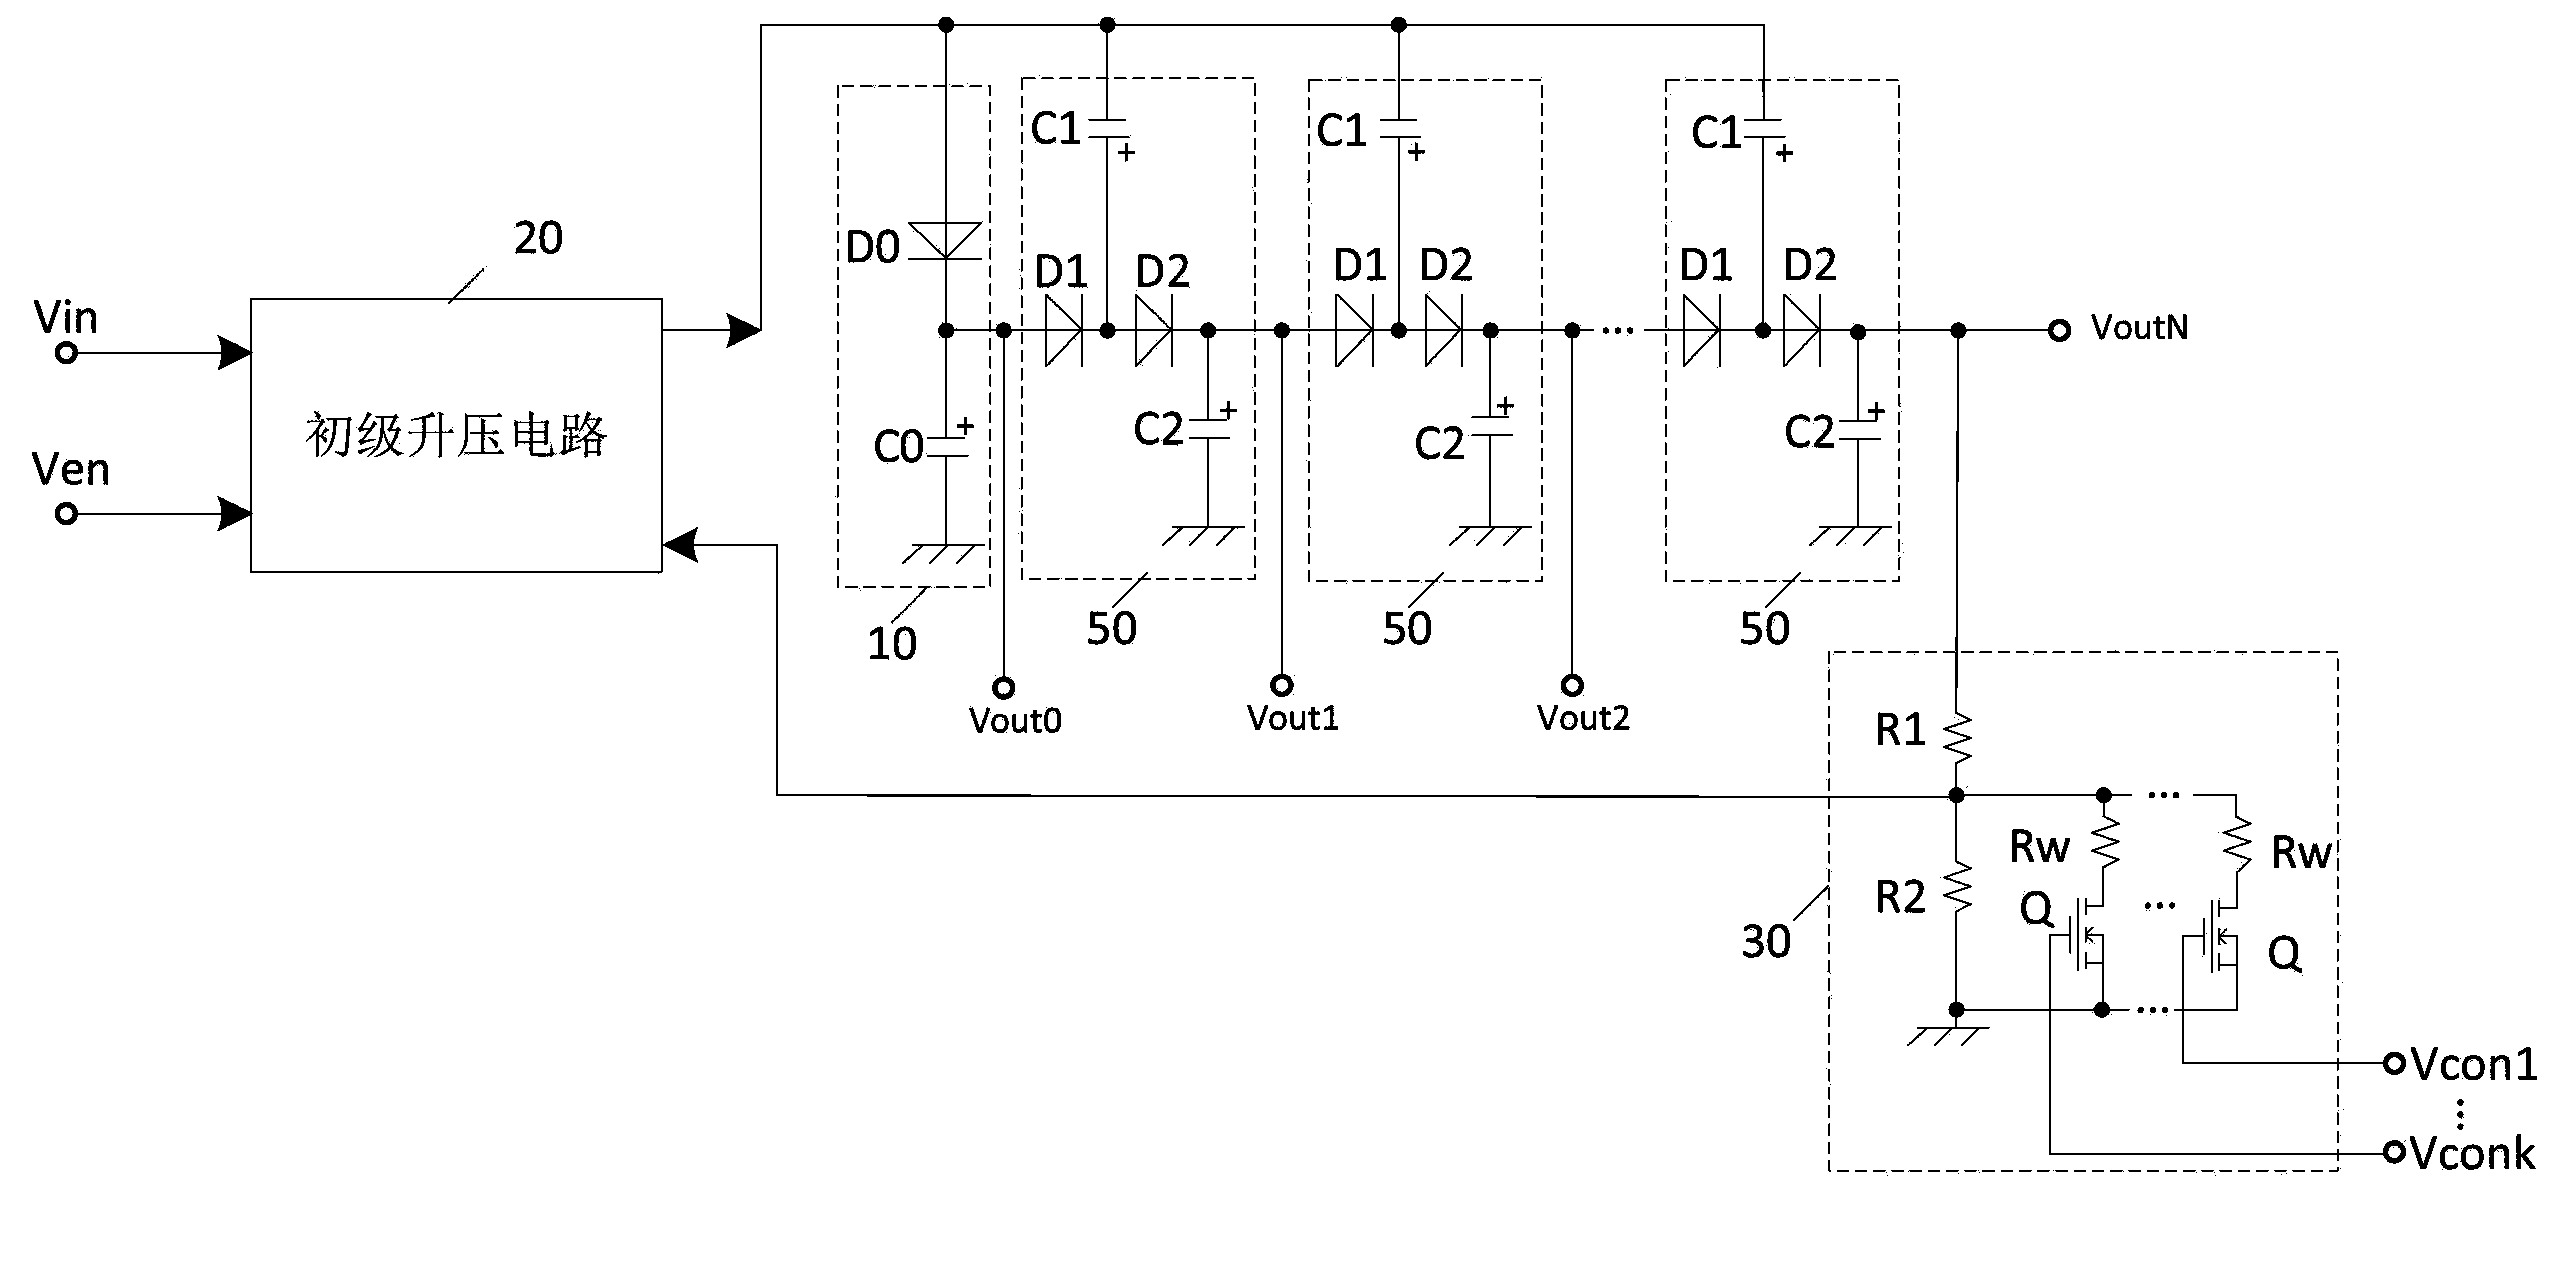 Multipath high voltage output power supply circuit for smectic phase liquid crystal electronic label, and boost method